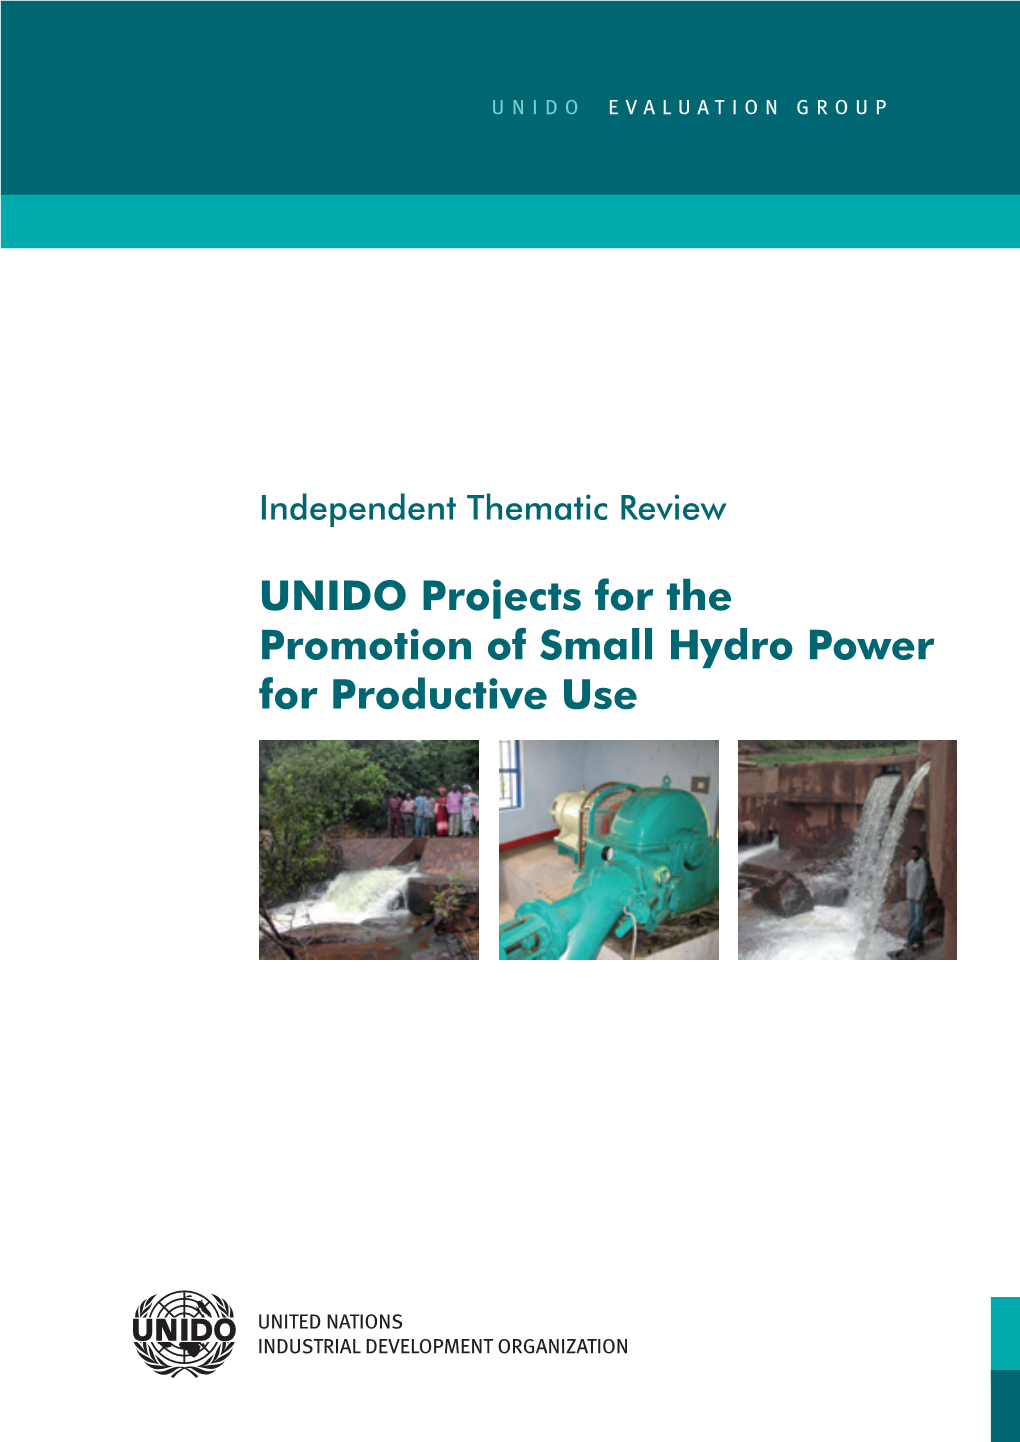 UNIDO Projects for the Promotion of Small Hydro Power for Productive Use